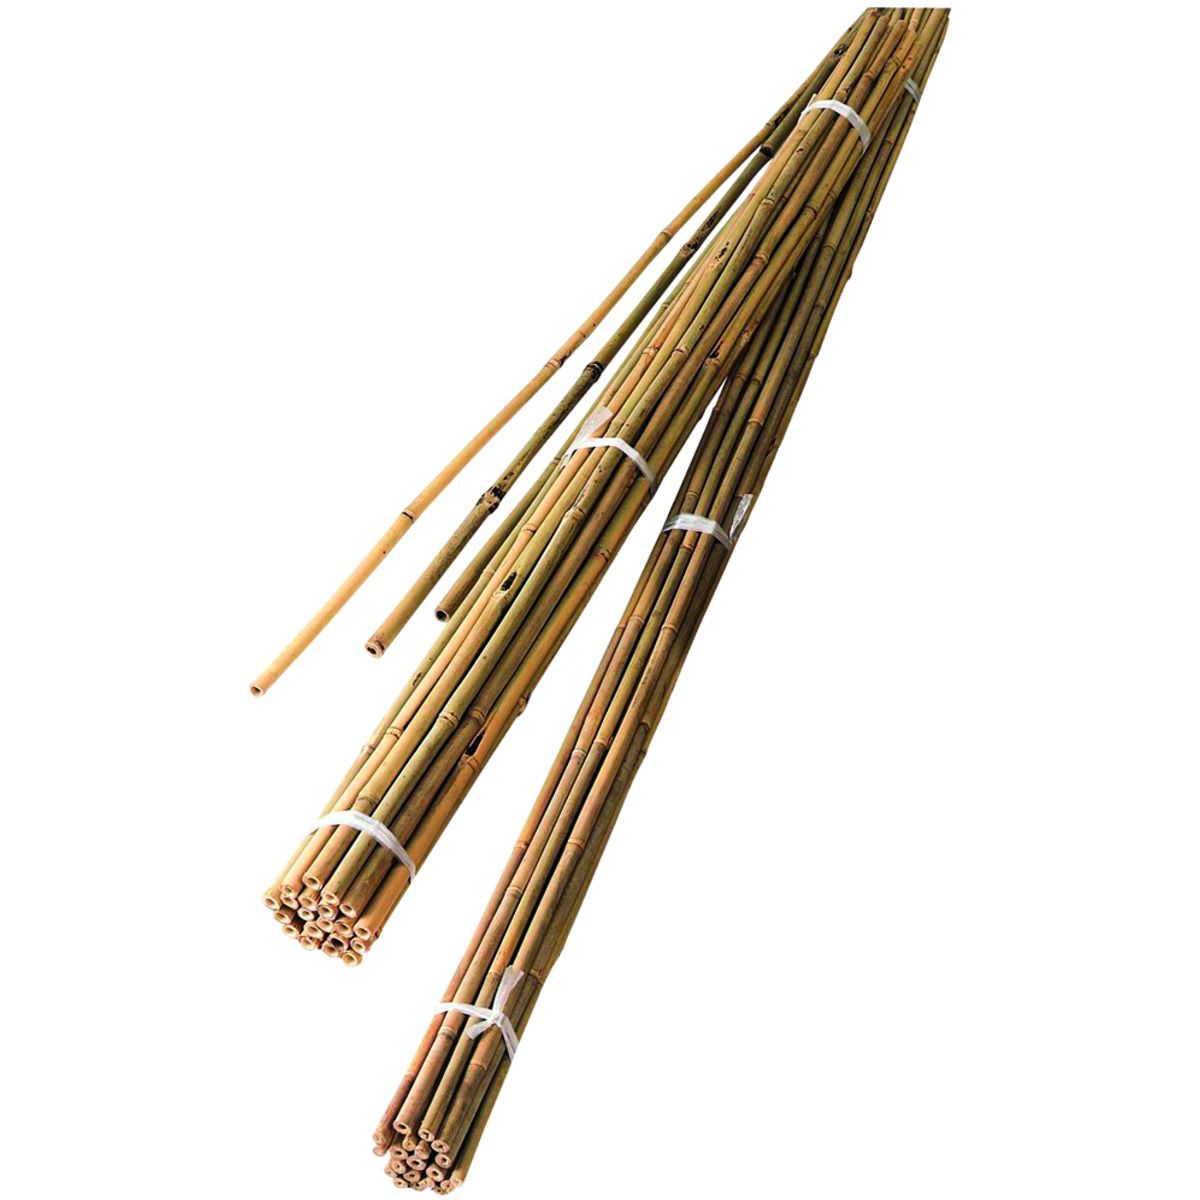 Image of Bamboo Canes 4ft 1.2m PK 10